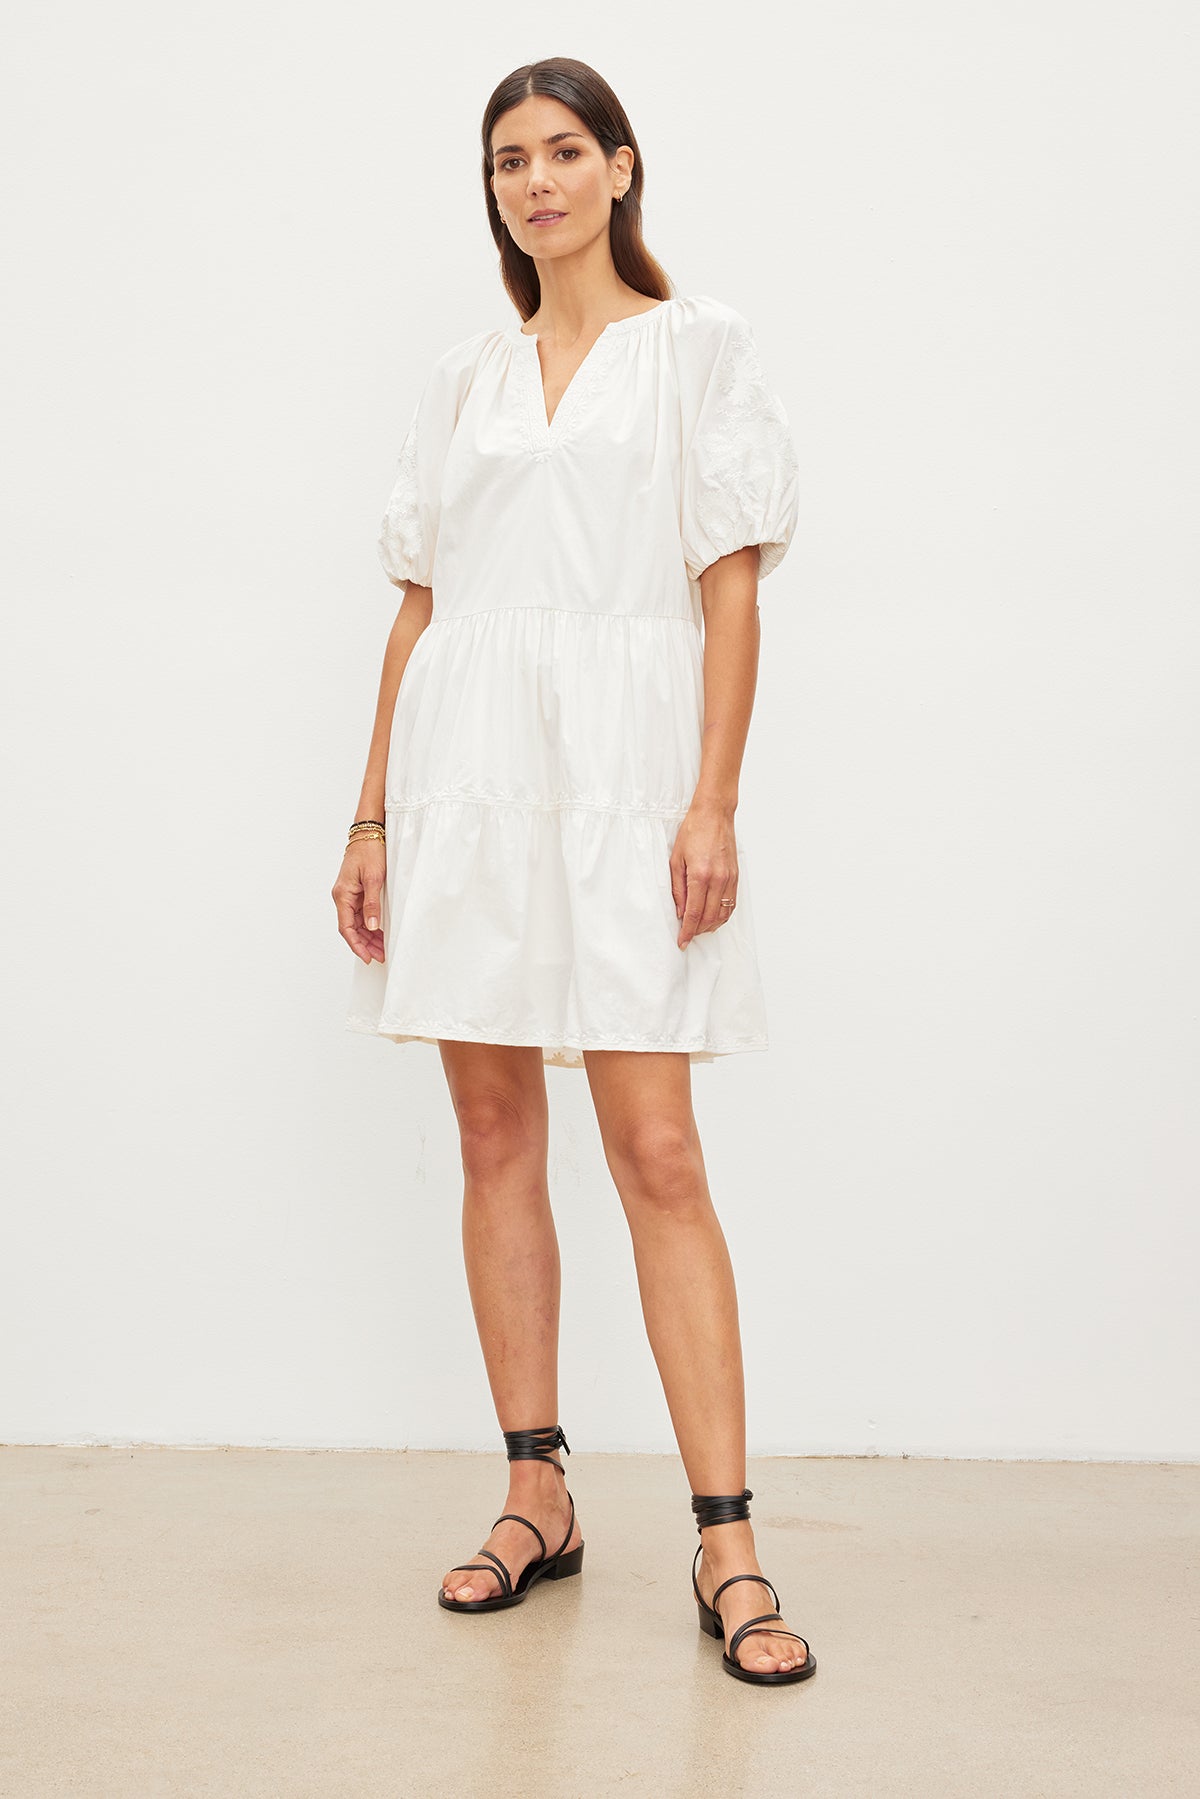 A woman stands in a white room, wearing a white, knee-length cotton dress with puffed sleeves and black sandals, looking directly at the camera. She is wearing the CHRISSY EMBROIDERED BOHO DRESS by Velvet by Graham & Spencer.-35955557564609